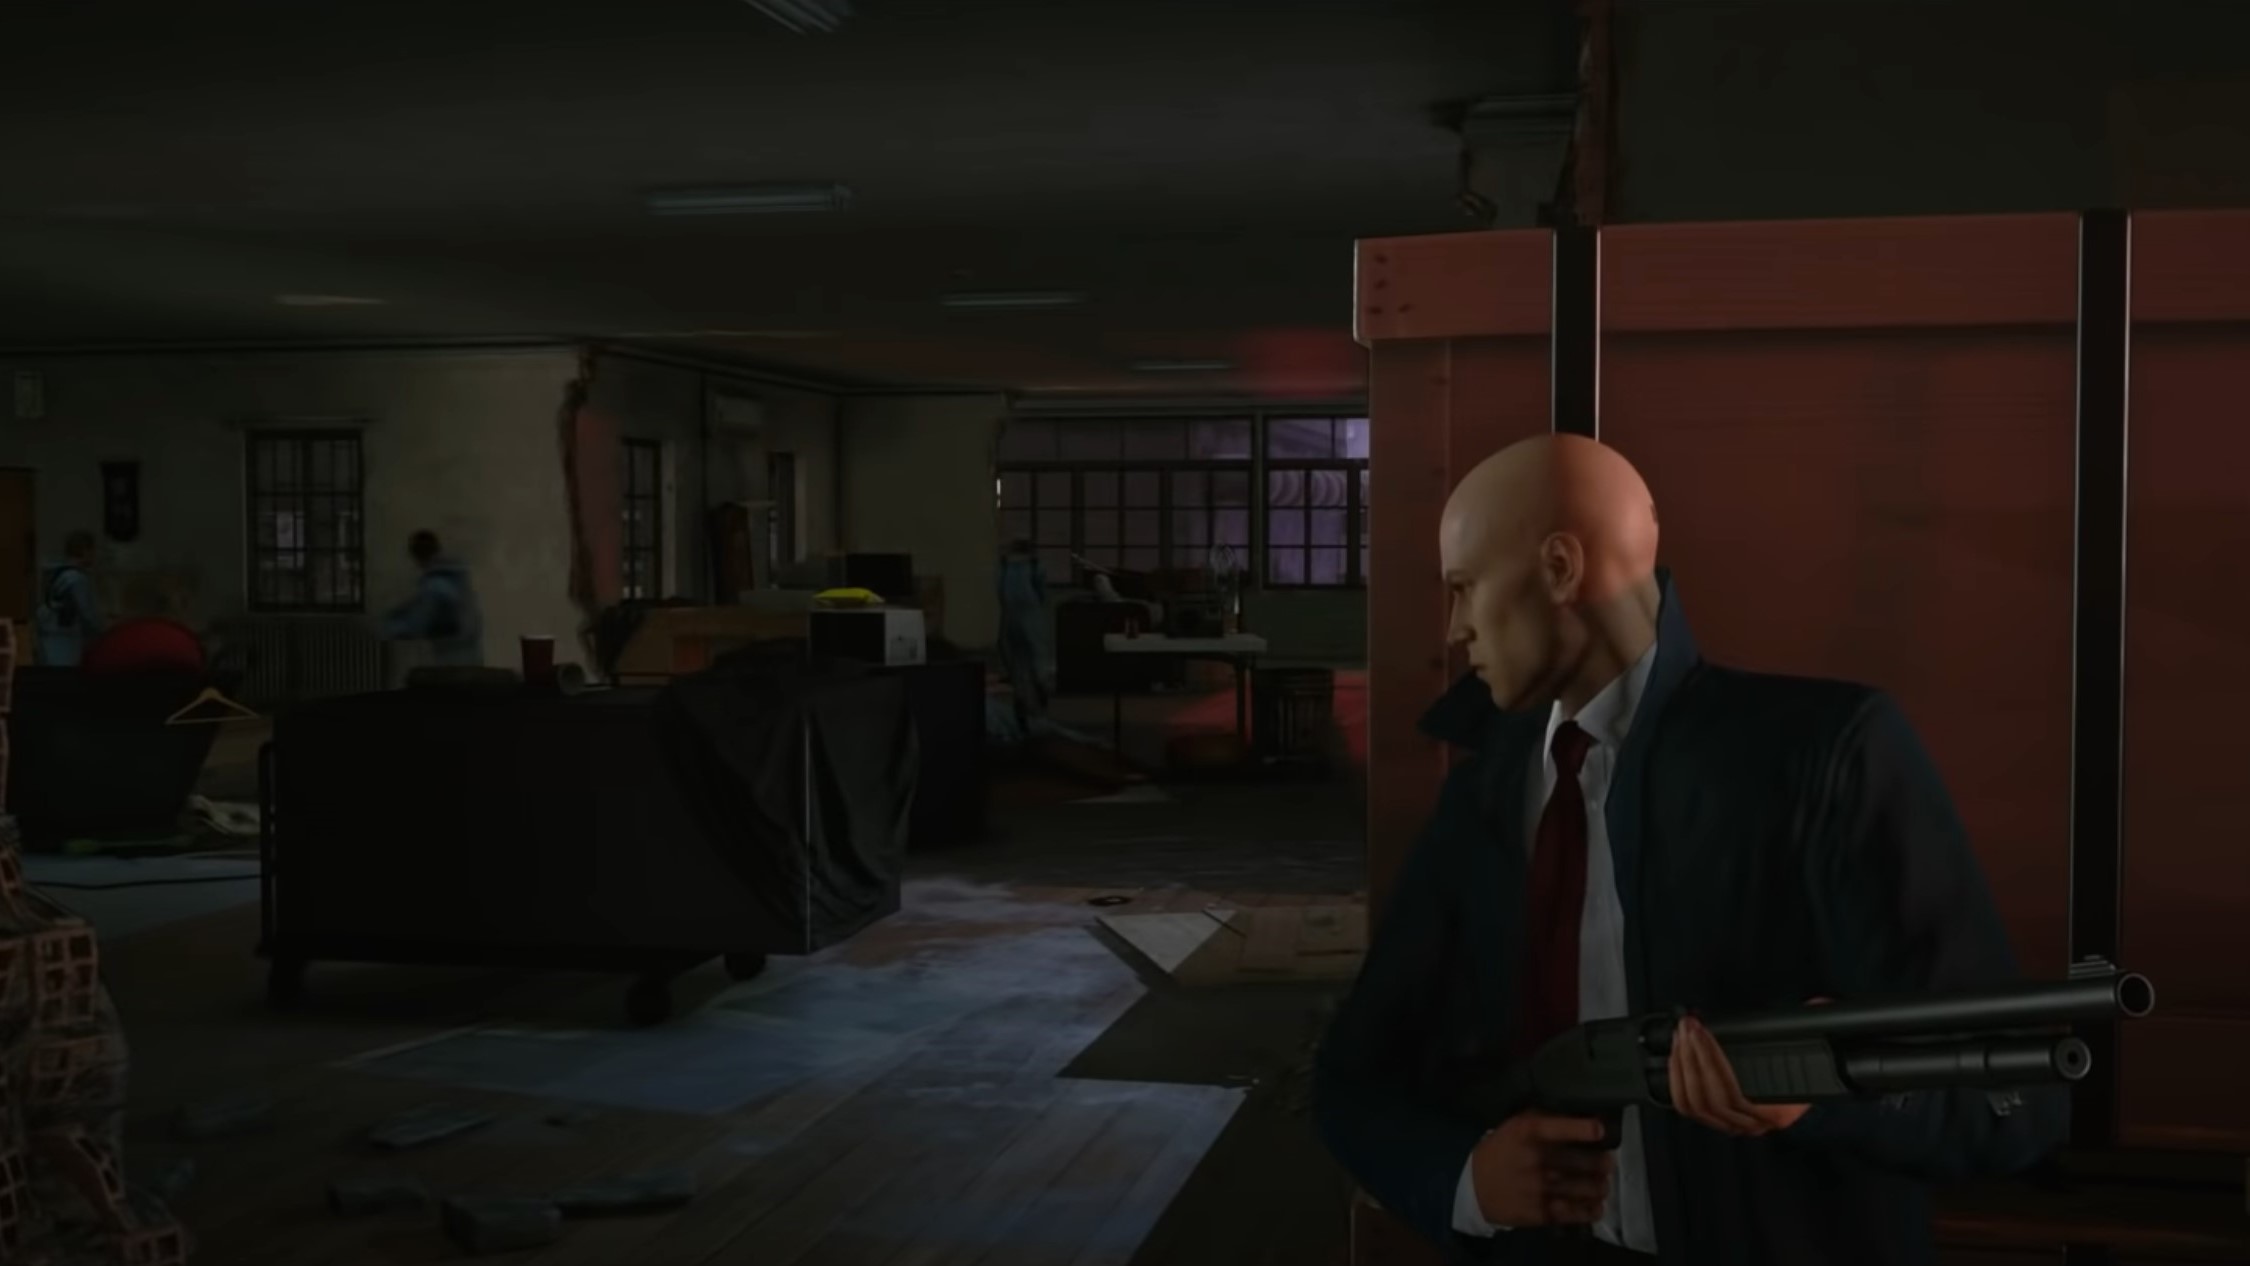 Hitman 3 on Series X has a resolution advantage over PS5